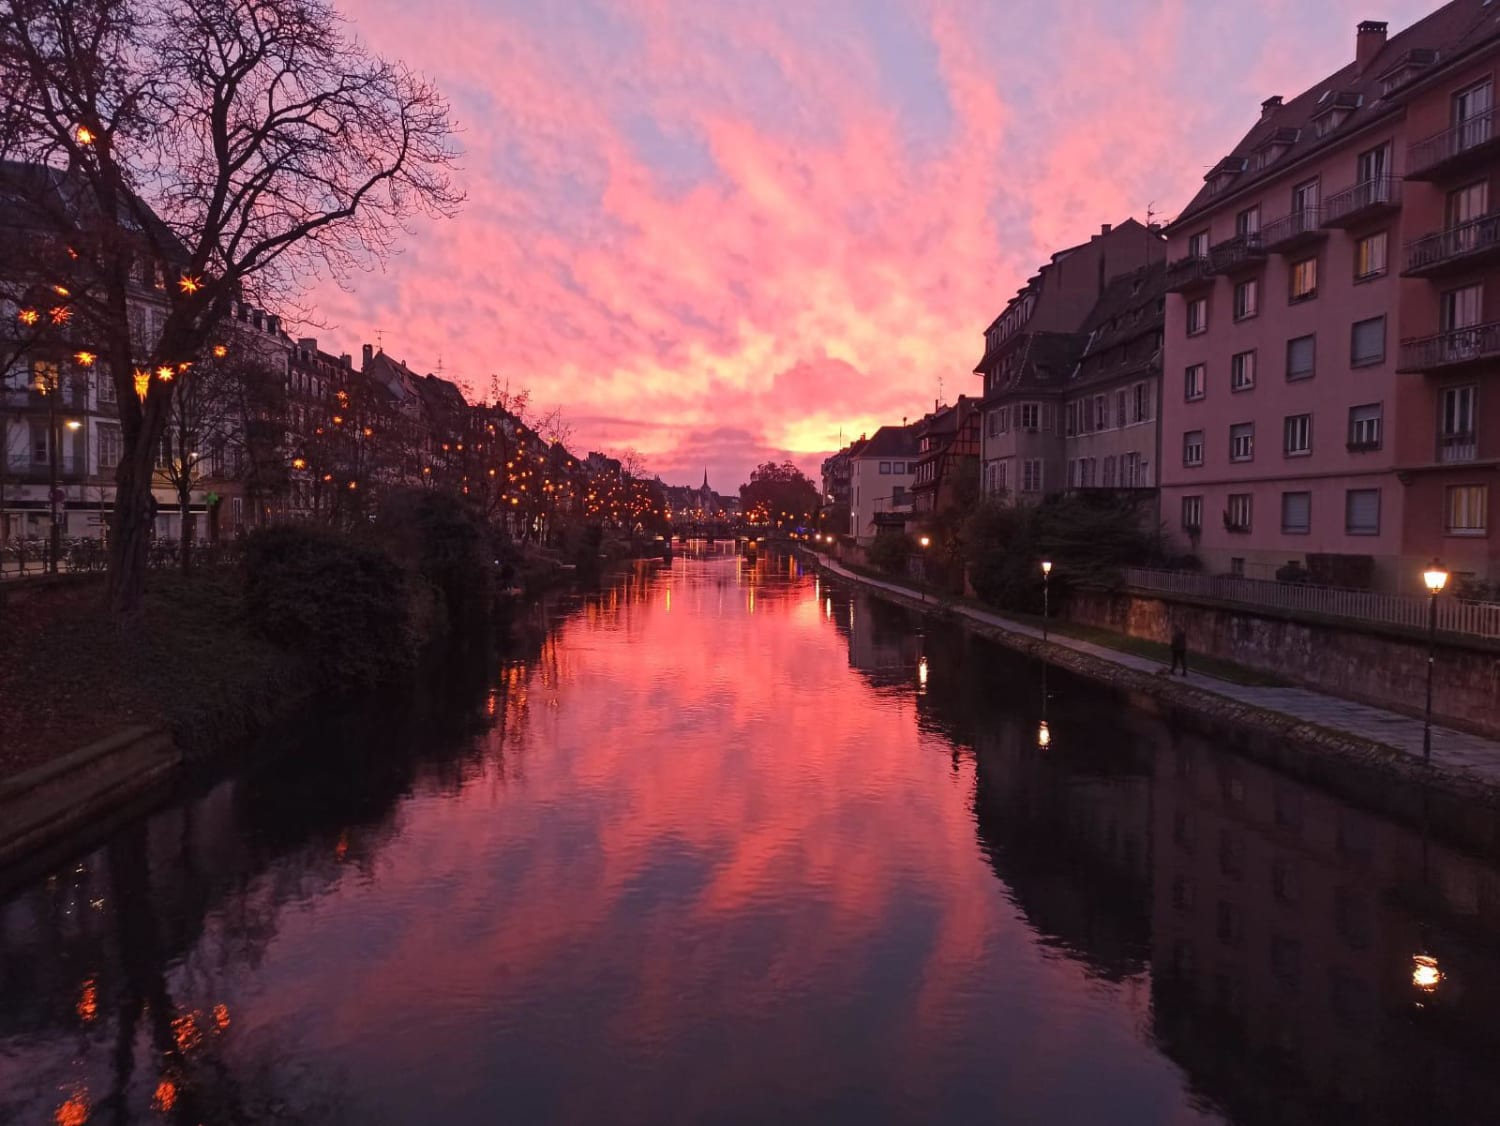 Strasbourg, France (picture by Basile Touratier)